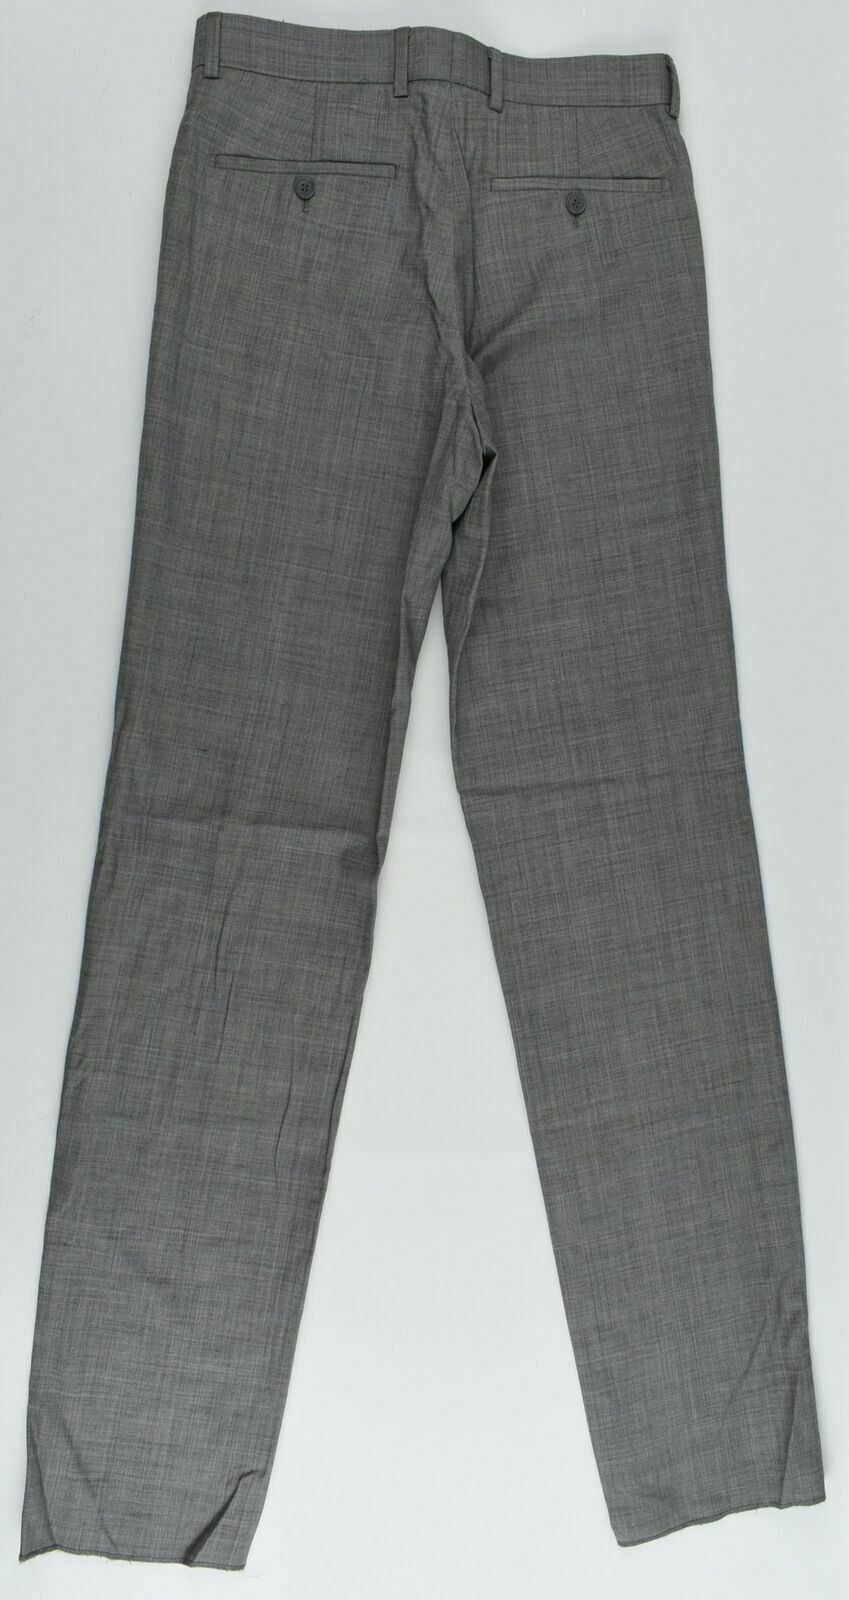 FRENCH CONNECTION Men's Formal Grey Wool Trousers - W28